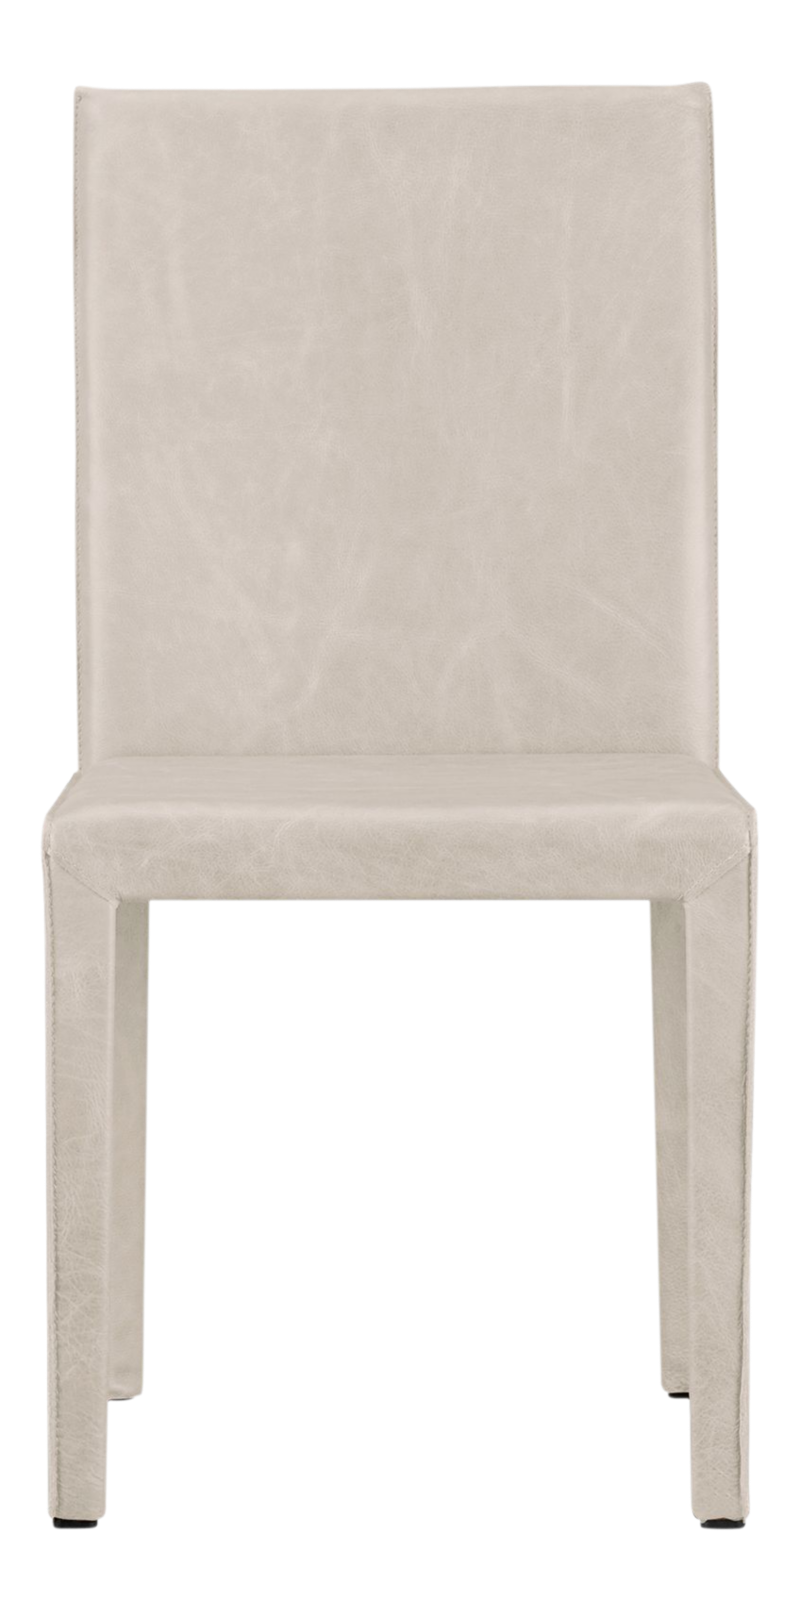 parsons grey marble top brass base dining tables crate and barrel mod metal sylvia accent table folio sand grain leather chair gold glass coffee target wood end door threshold